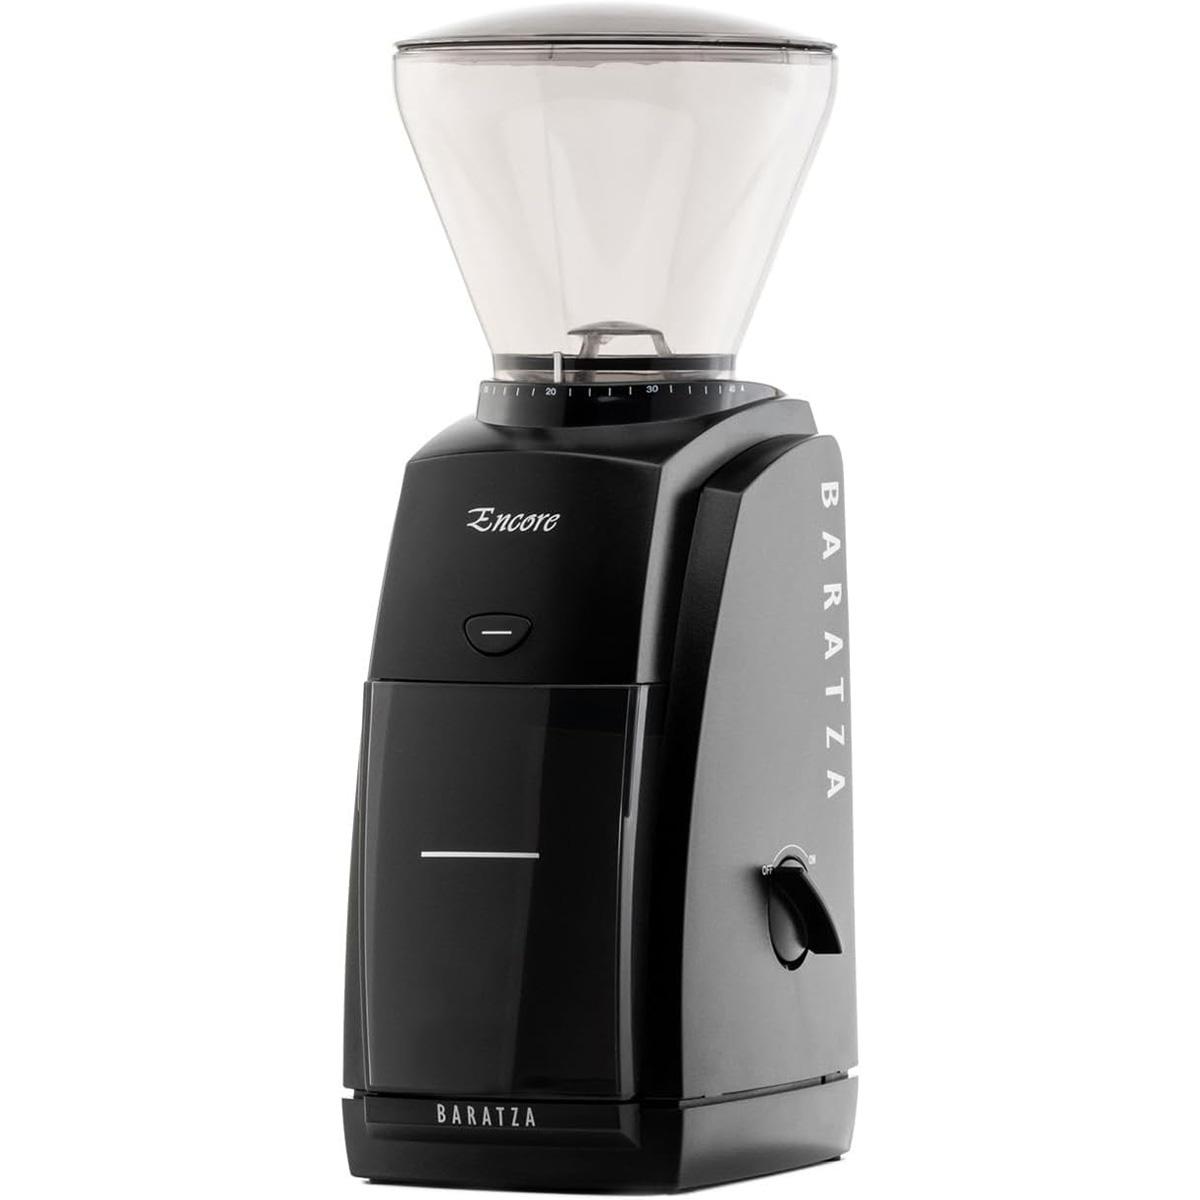 Baratza Encore Conical Burr Coffee Grinder for $119.95 Shipped